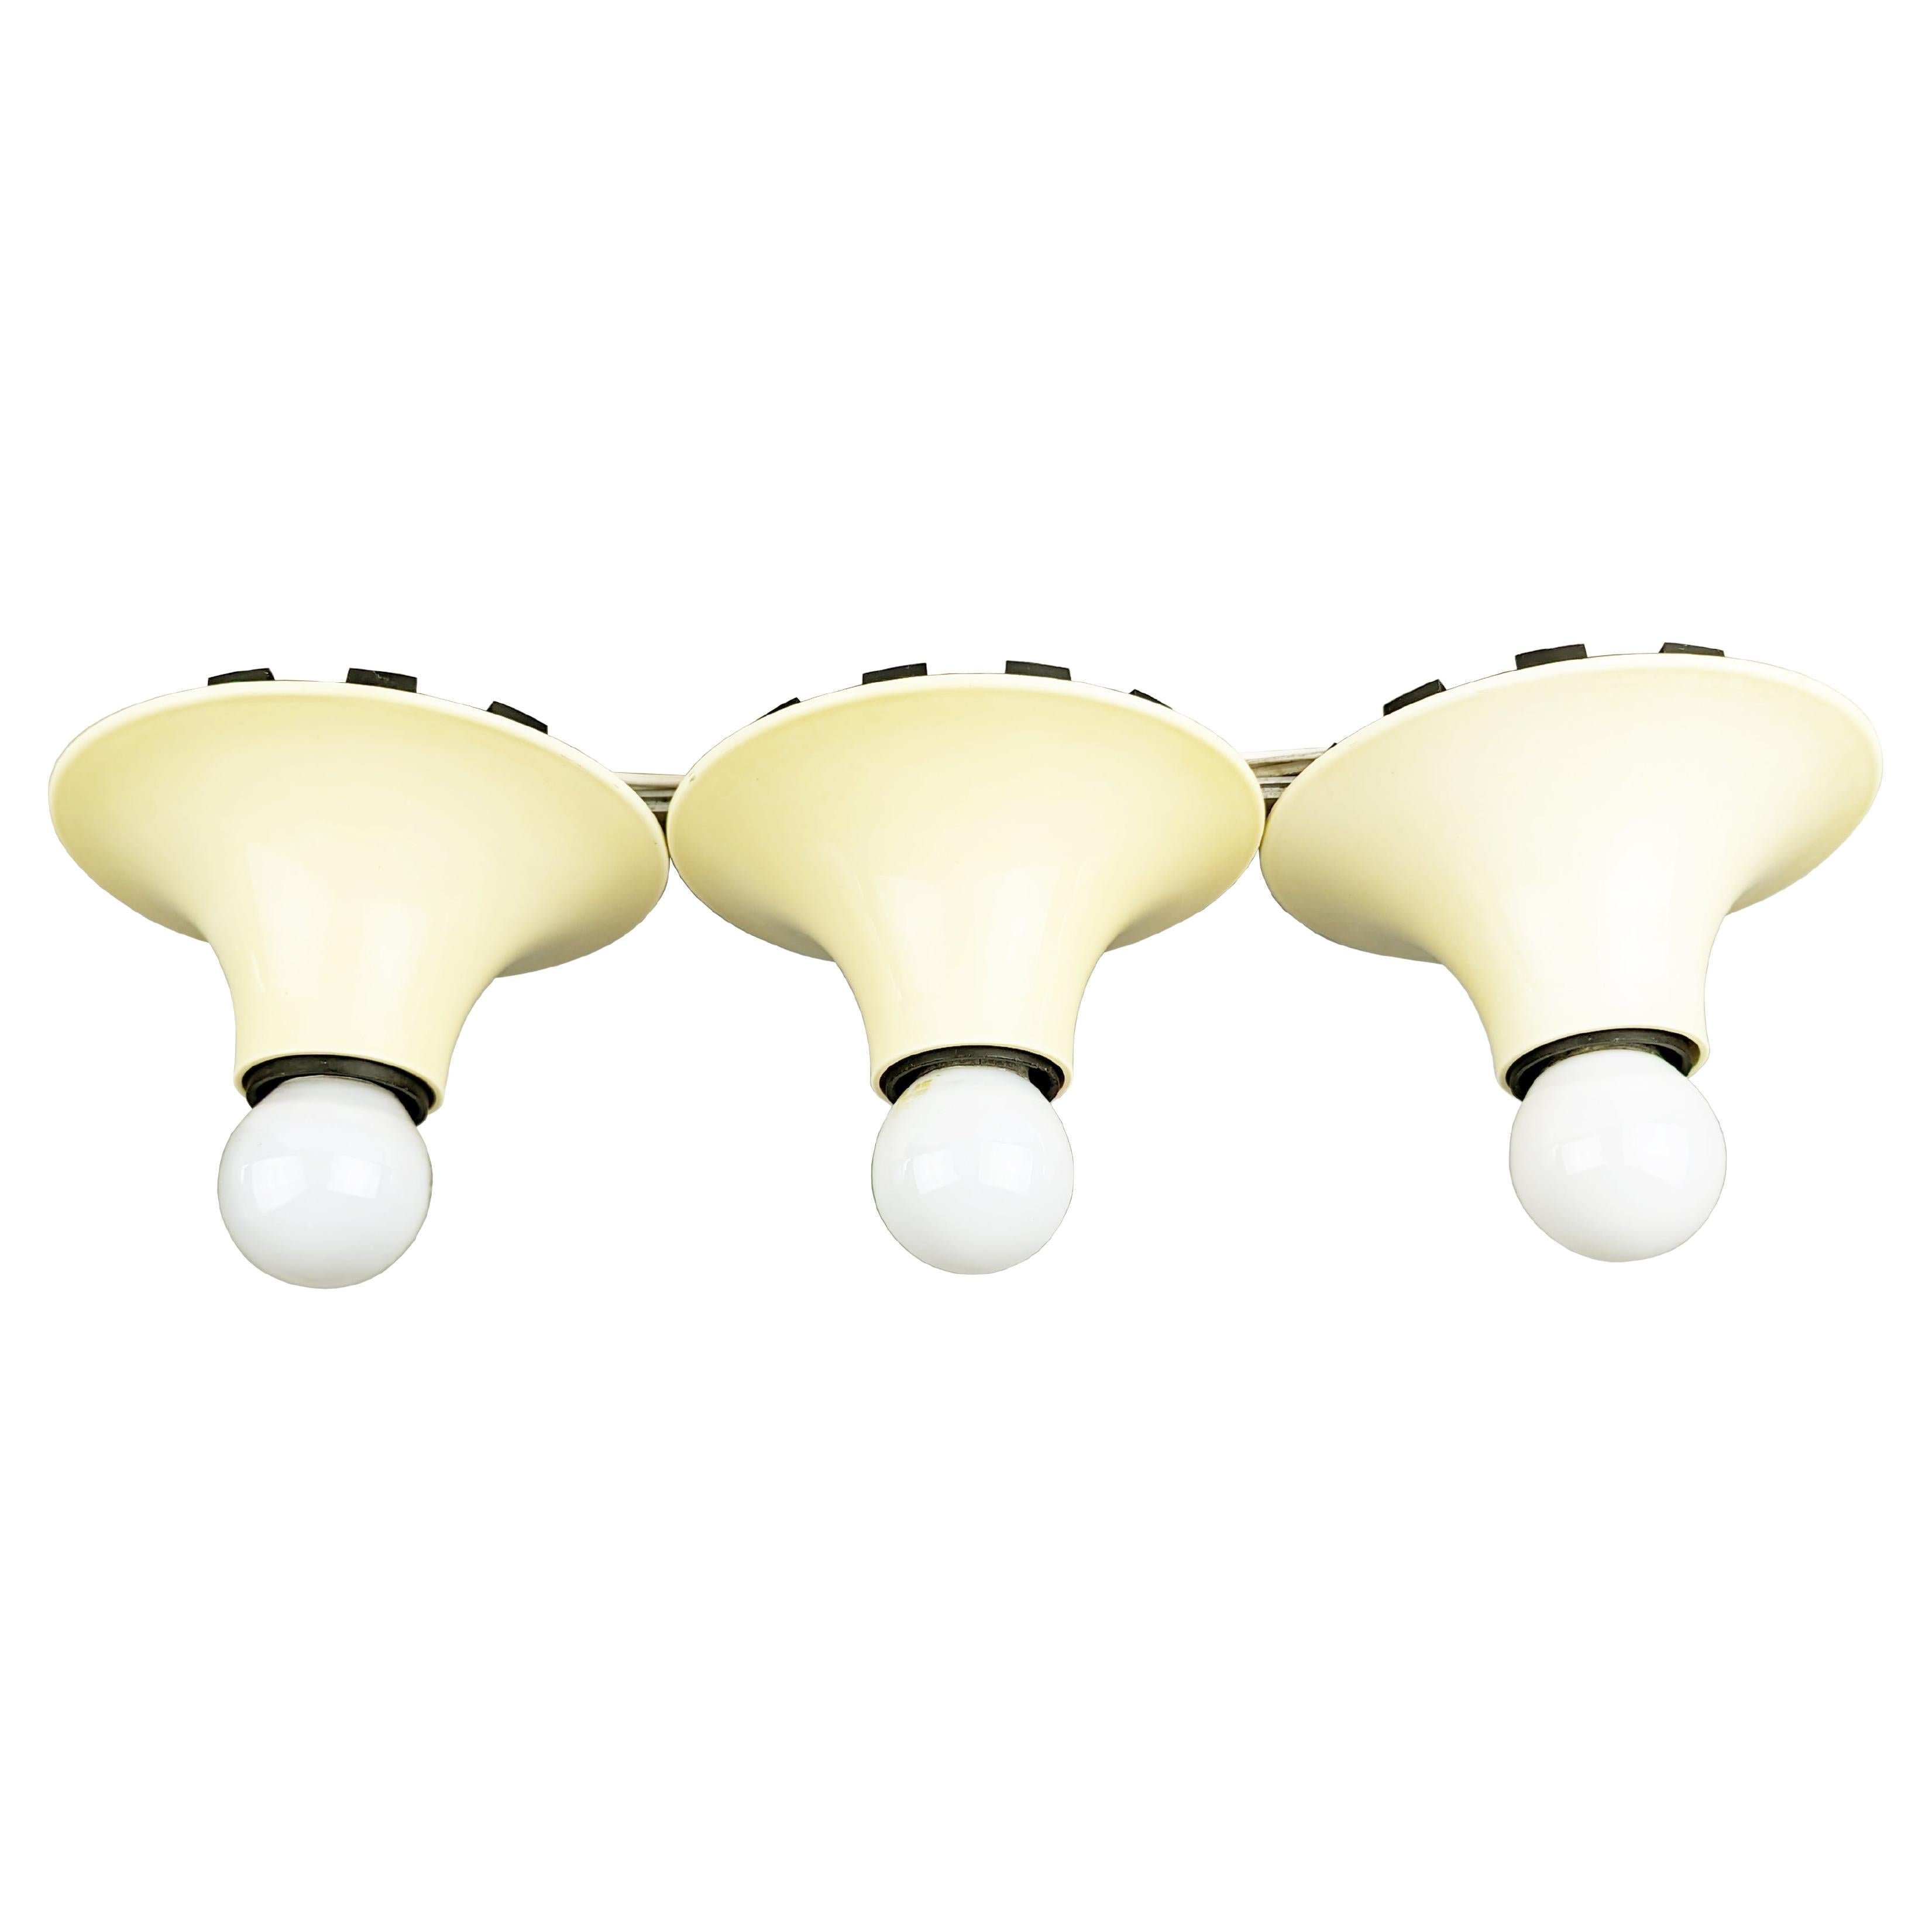 White Ivory Plastic Wall or Ceiling Teti Lamps by Vico Magistretti for Artemide